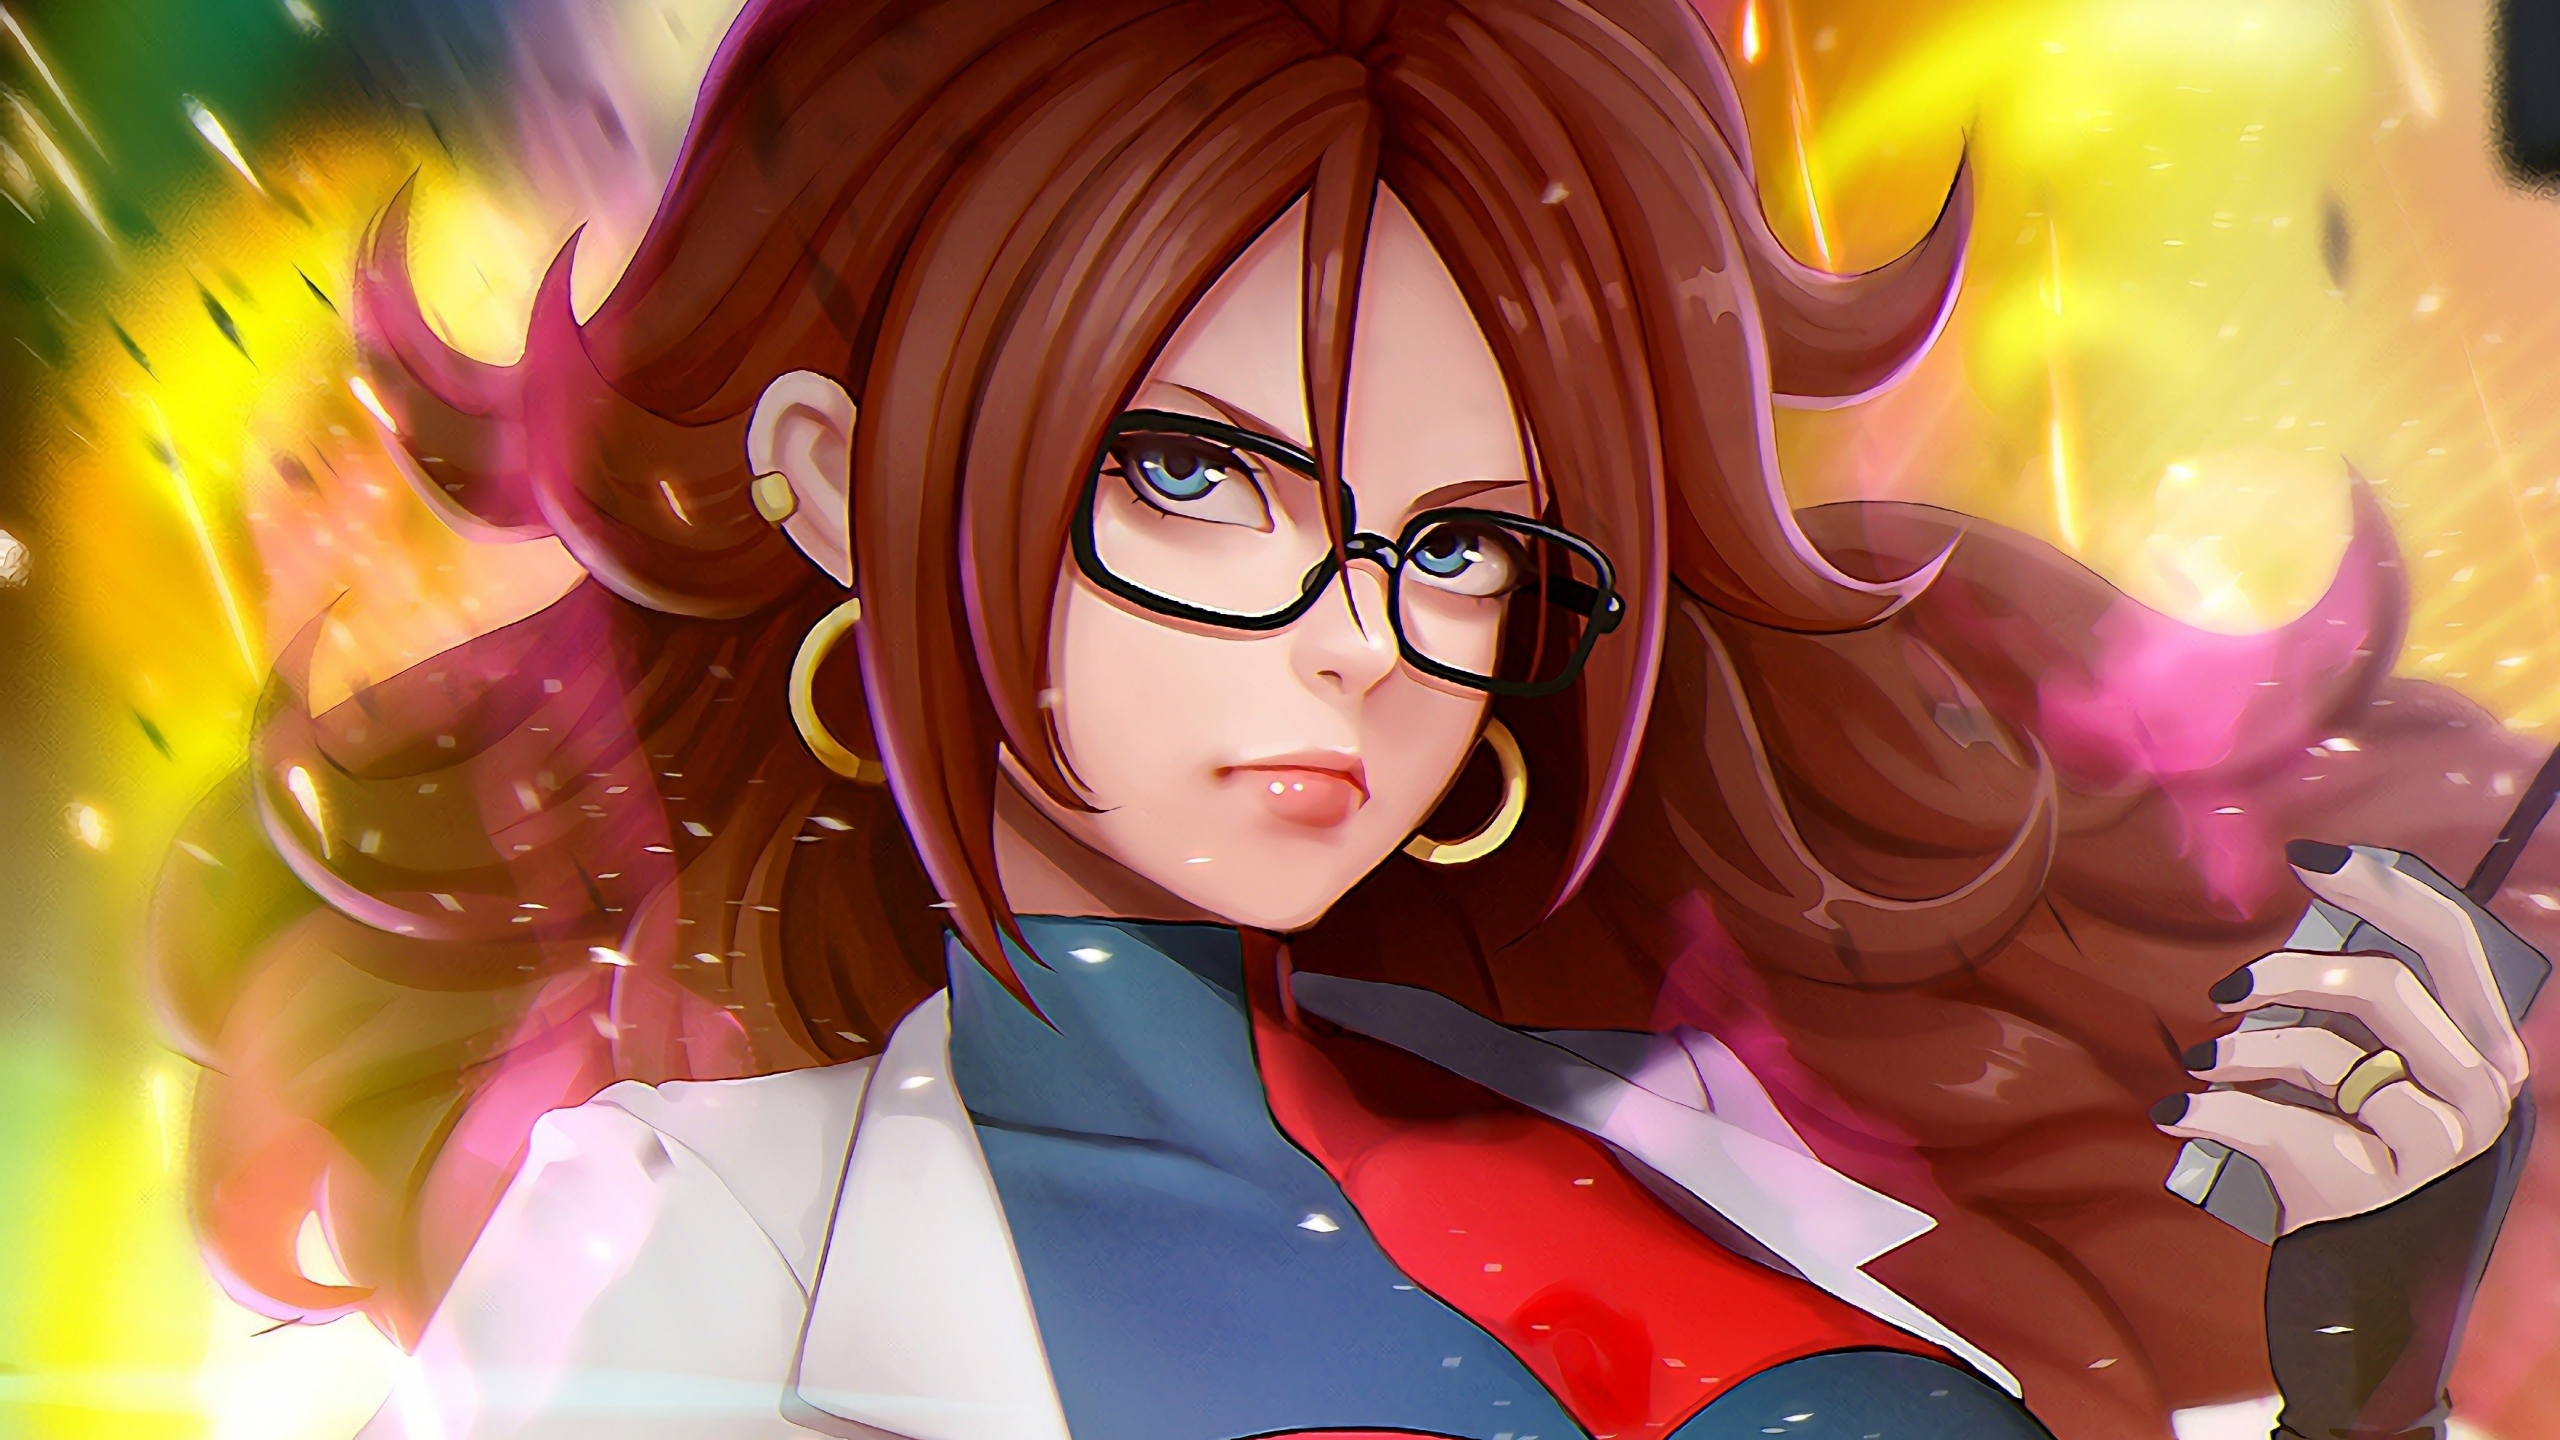 Download 2560x1440 Wallpaper Hot Dragon Ball Fighterz Android 21 Glasses Dual Wide Widescreen 16 9 Widescreen 2560x1440 Hd Image Background 4678